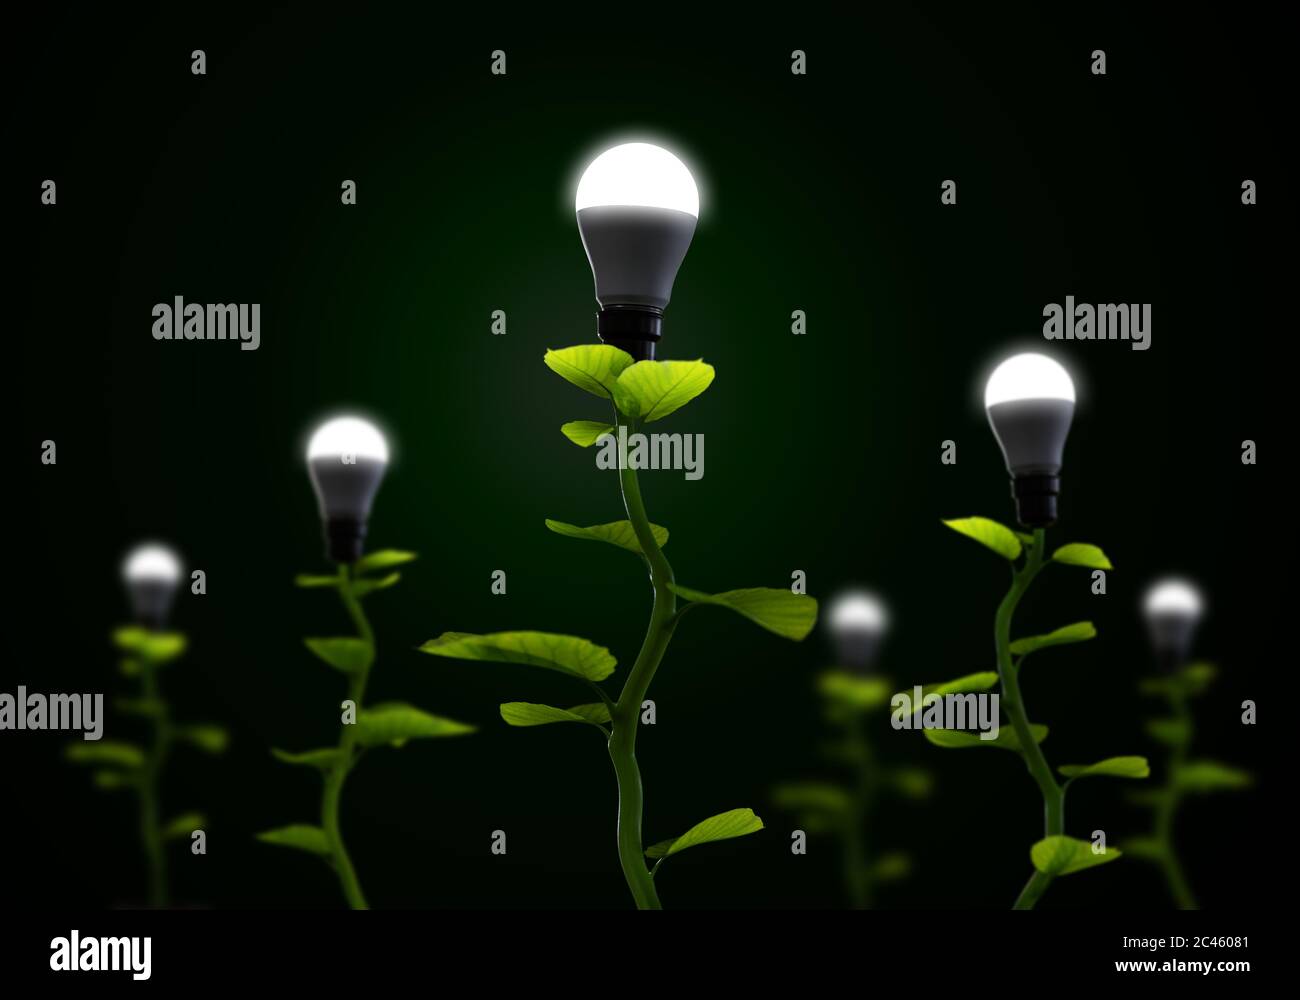 New Green renewable and Sustainable Energy Concept Stock Photo